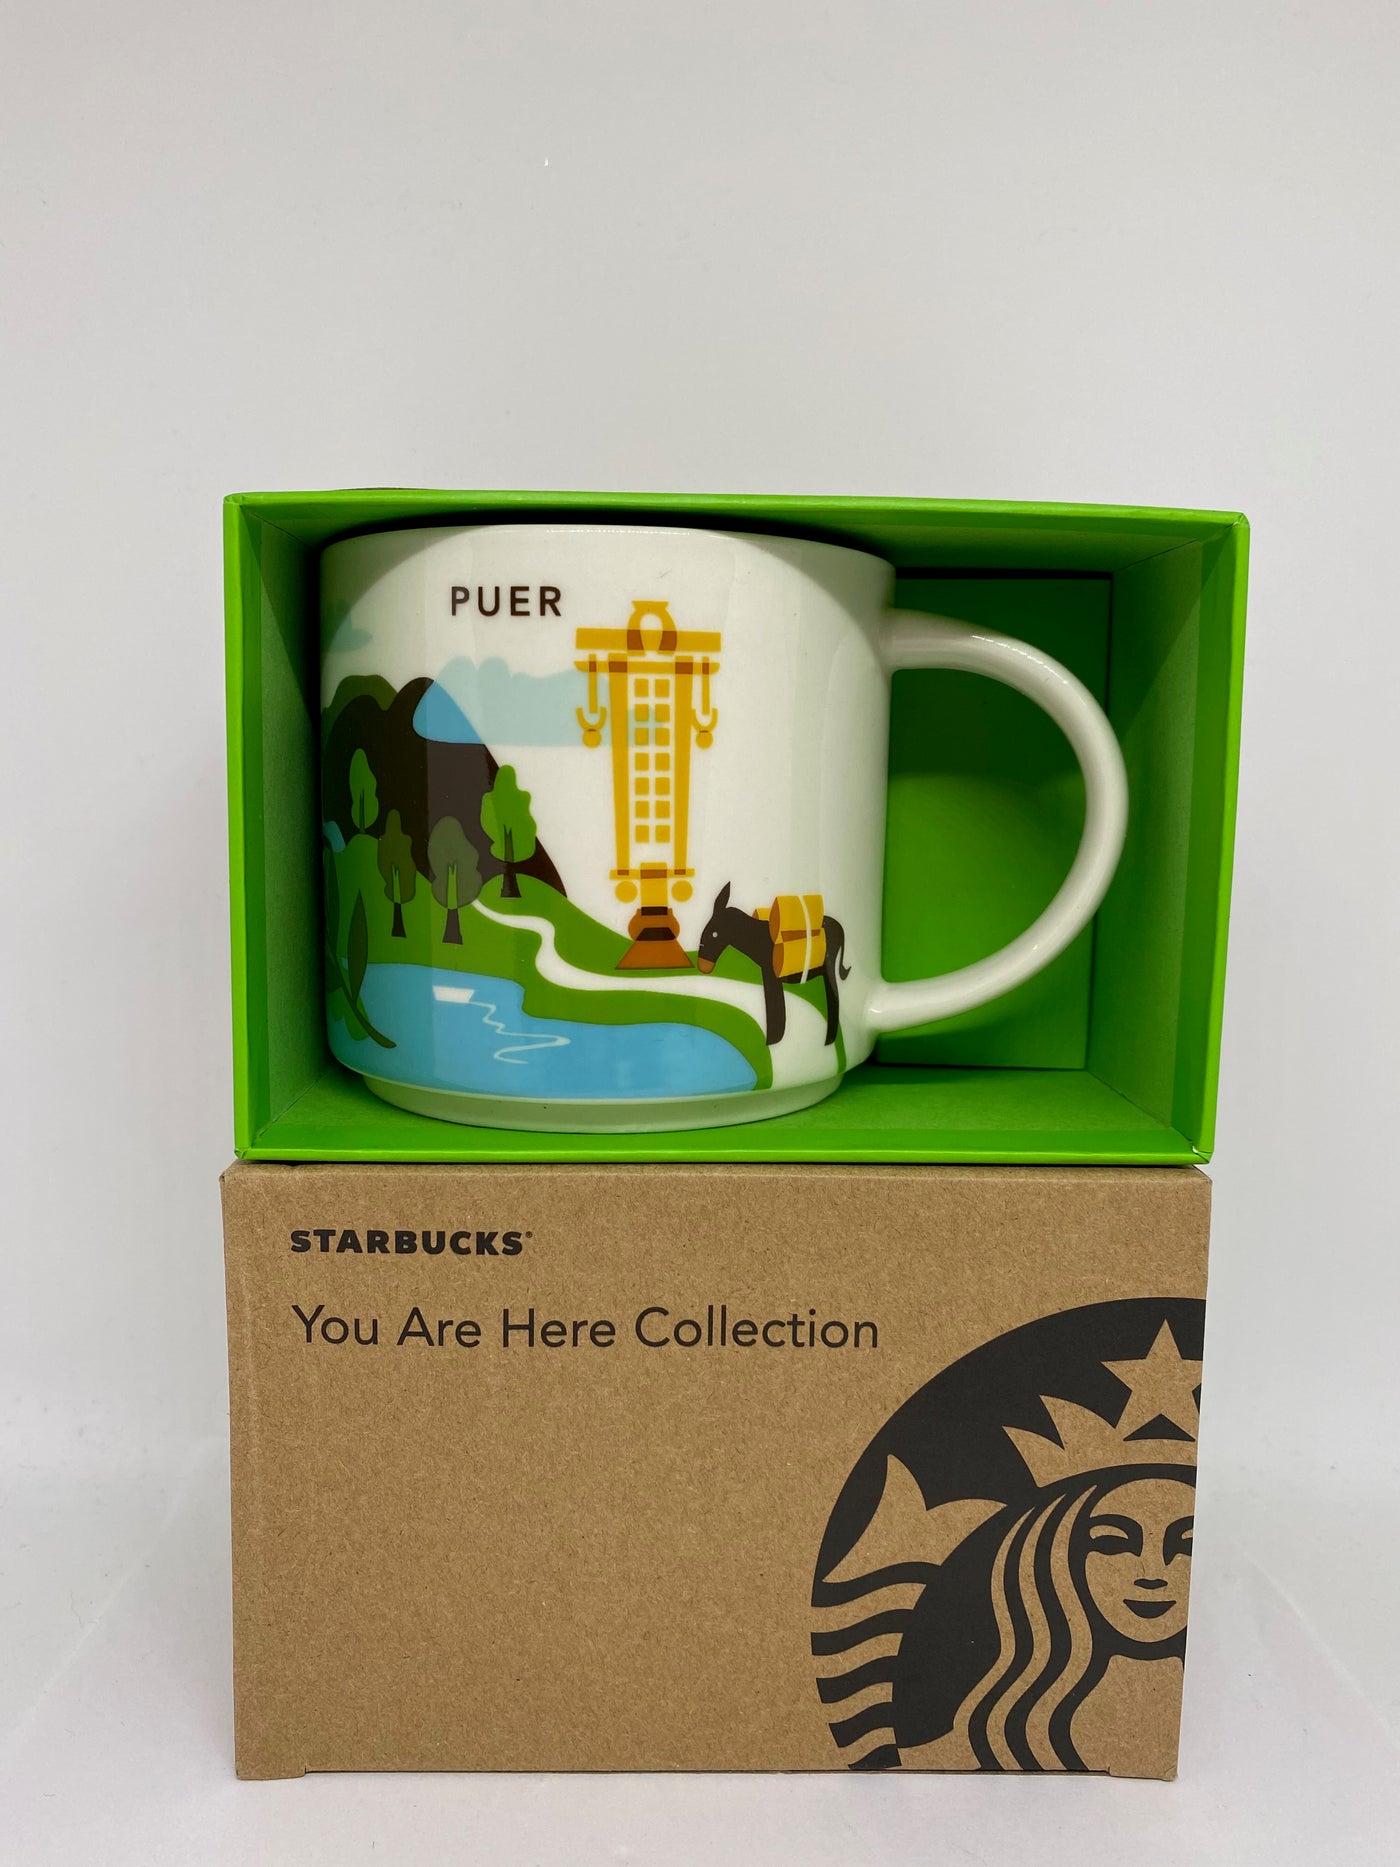 Starbucks You Are Here Collection Puer China Ceramic Coffee Mug New With Box